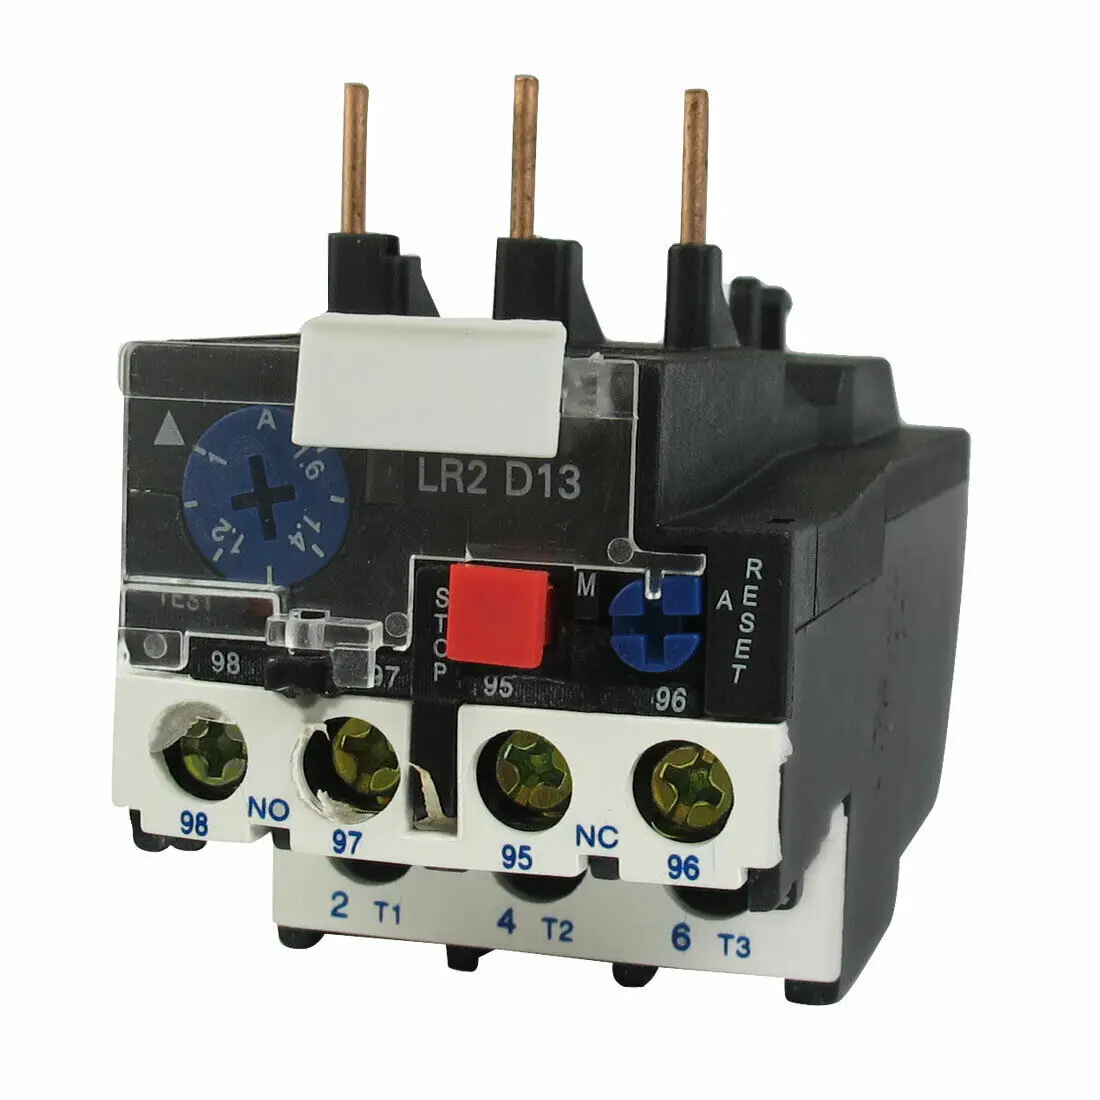 

LR2-13 1.6A 1-1.6A 3-Phase 1NO 1NC Electric Thermal Overload Relay